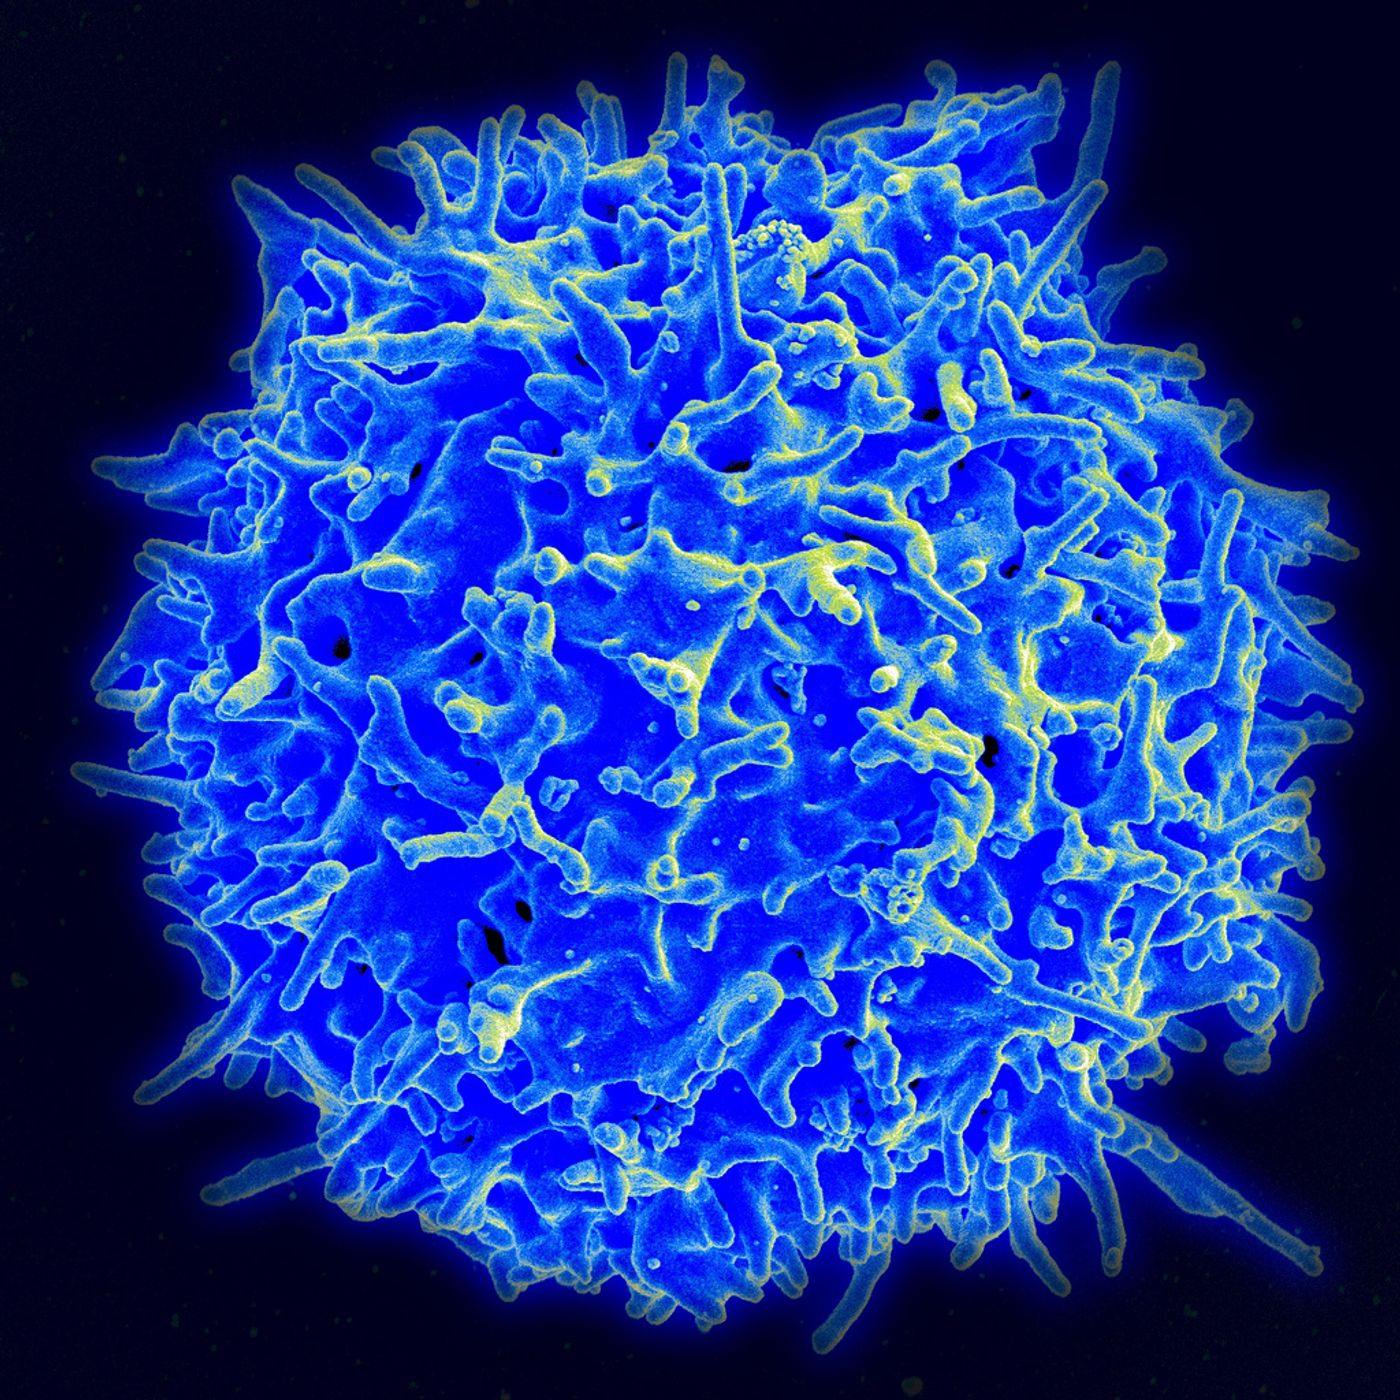 Scanning electron micrograph of a T cell. Credit: NIAID